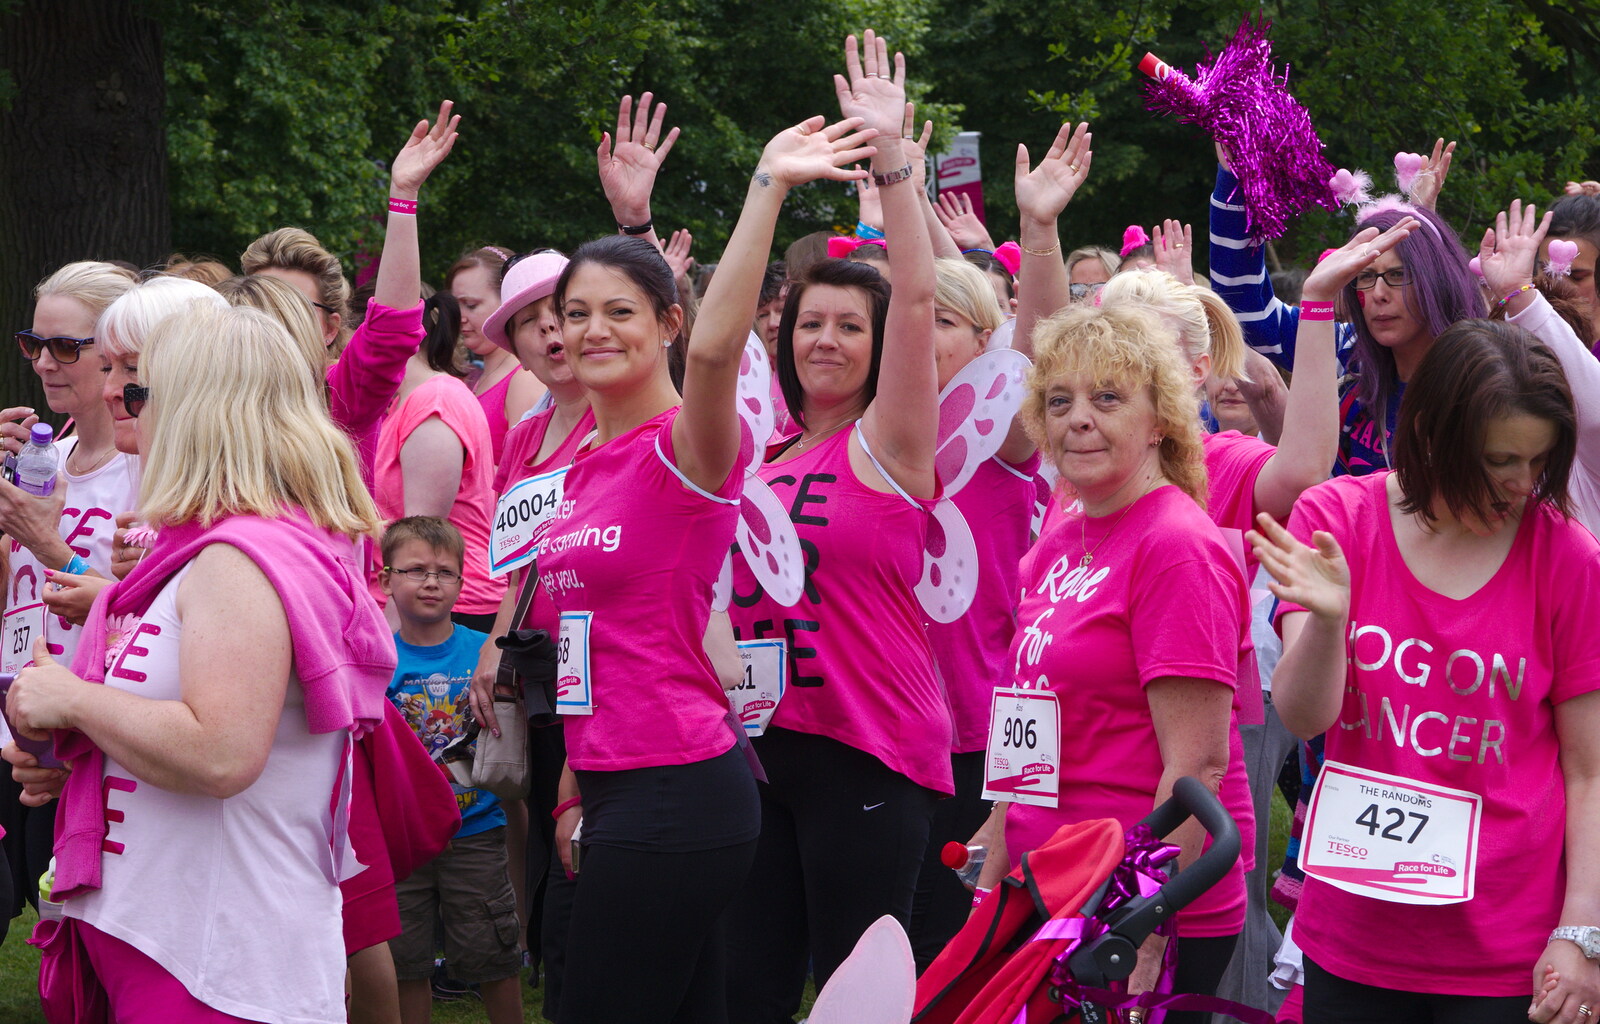 A bunch of 'pink ladies' wave from Isobel's Race For Life, Chantry Park, Ipswich - 11th June 2014